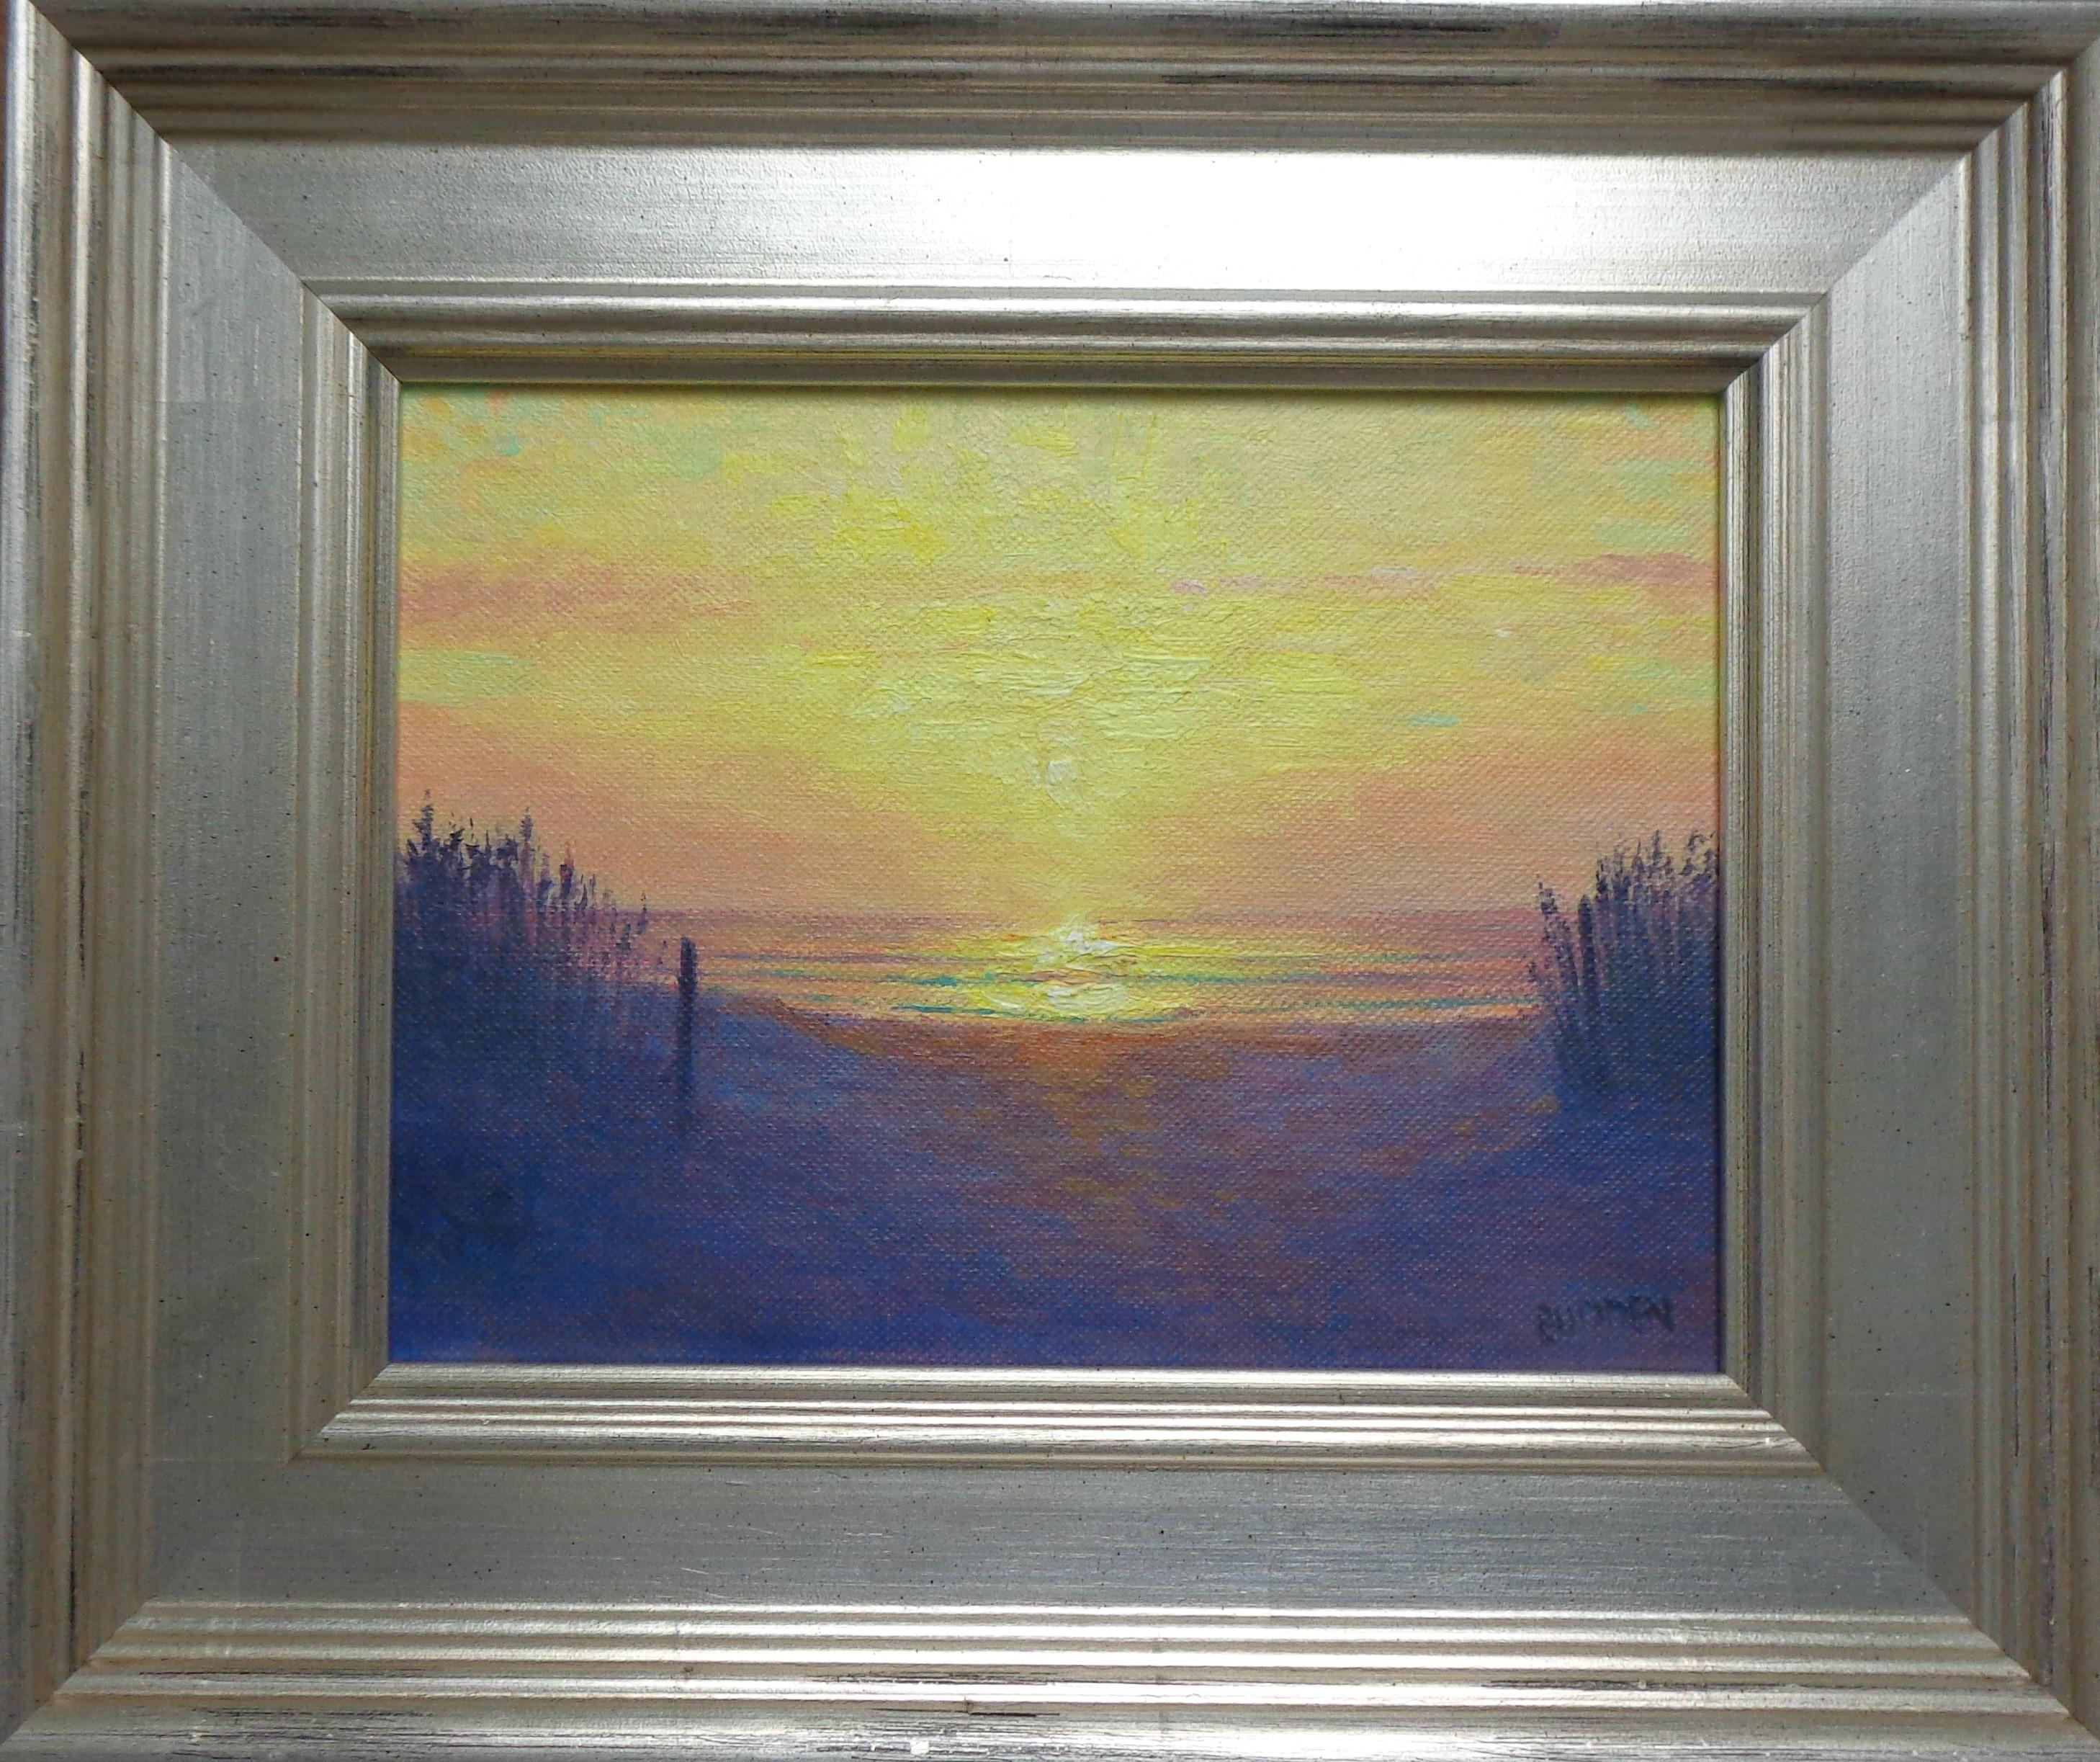 Sunrise Colors
oil/panel
An oil painting on canvas panel by award winning contemporary artist Michael Budden that showcases a dramatic sensational sunset created in an impressionistic realism style. The image measures 6 x 8 unframed. 
ARTIST'S